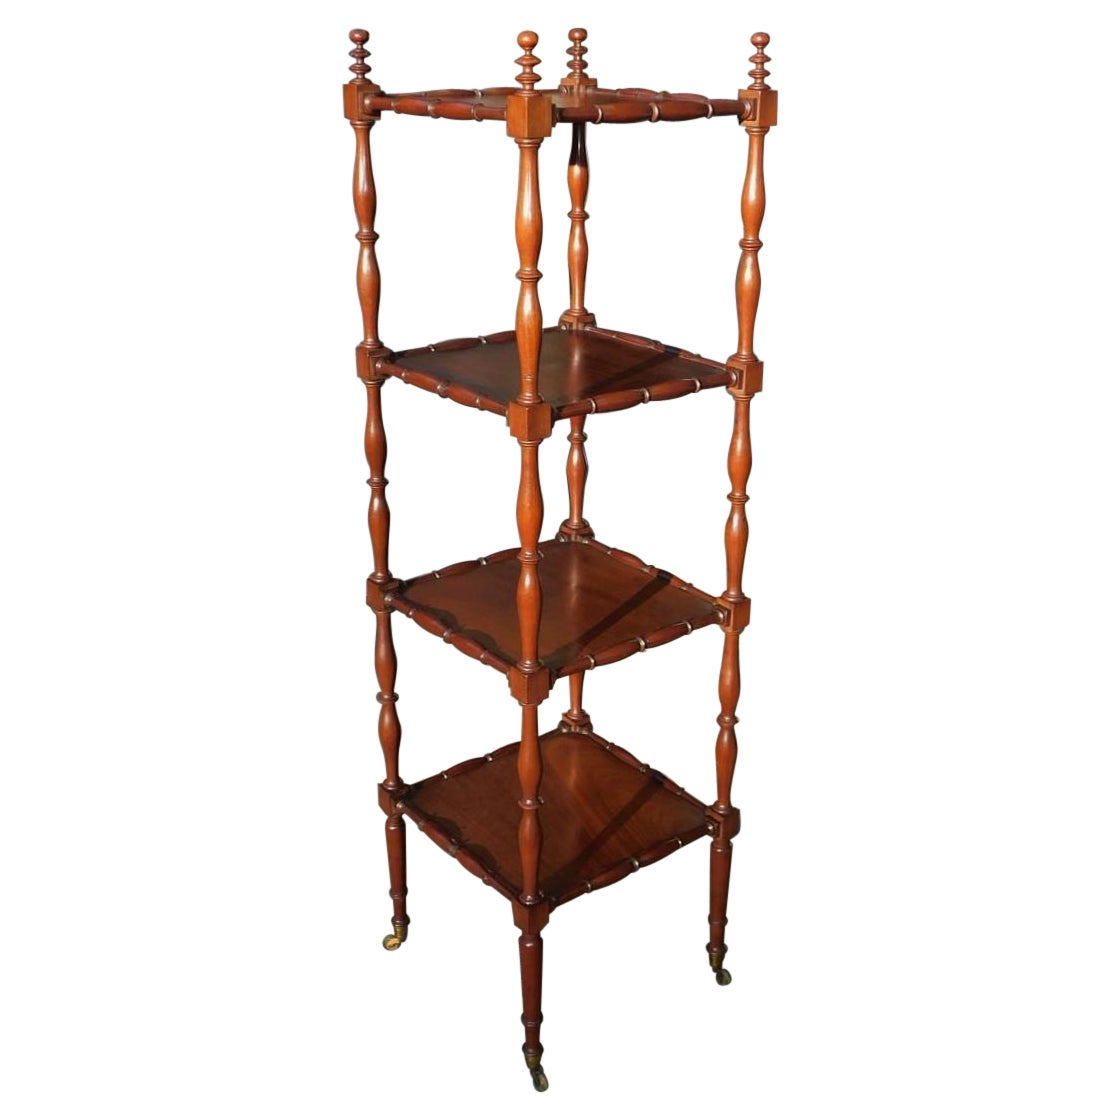 English Regency Mahogany Four Tiered Finial Etagere with Brass Casters, C. 1800